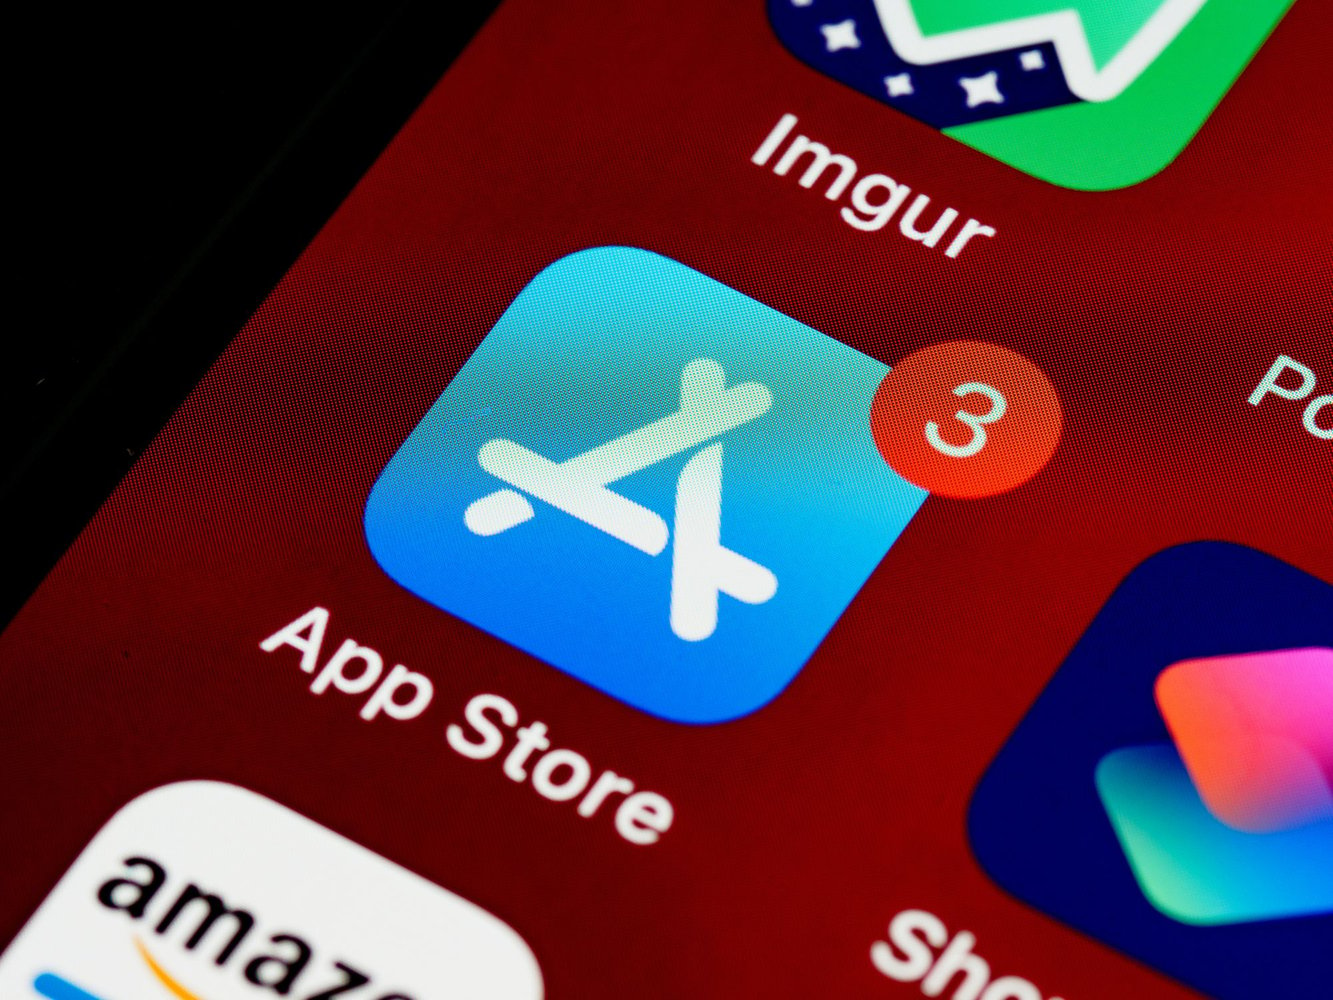 iPhone screen showing app store icon